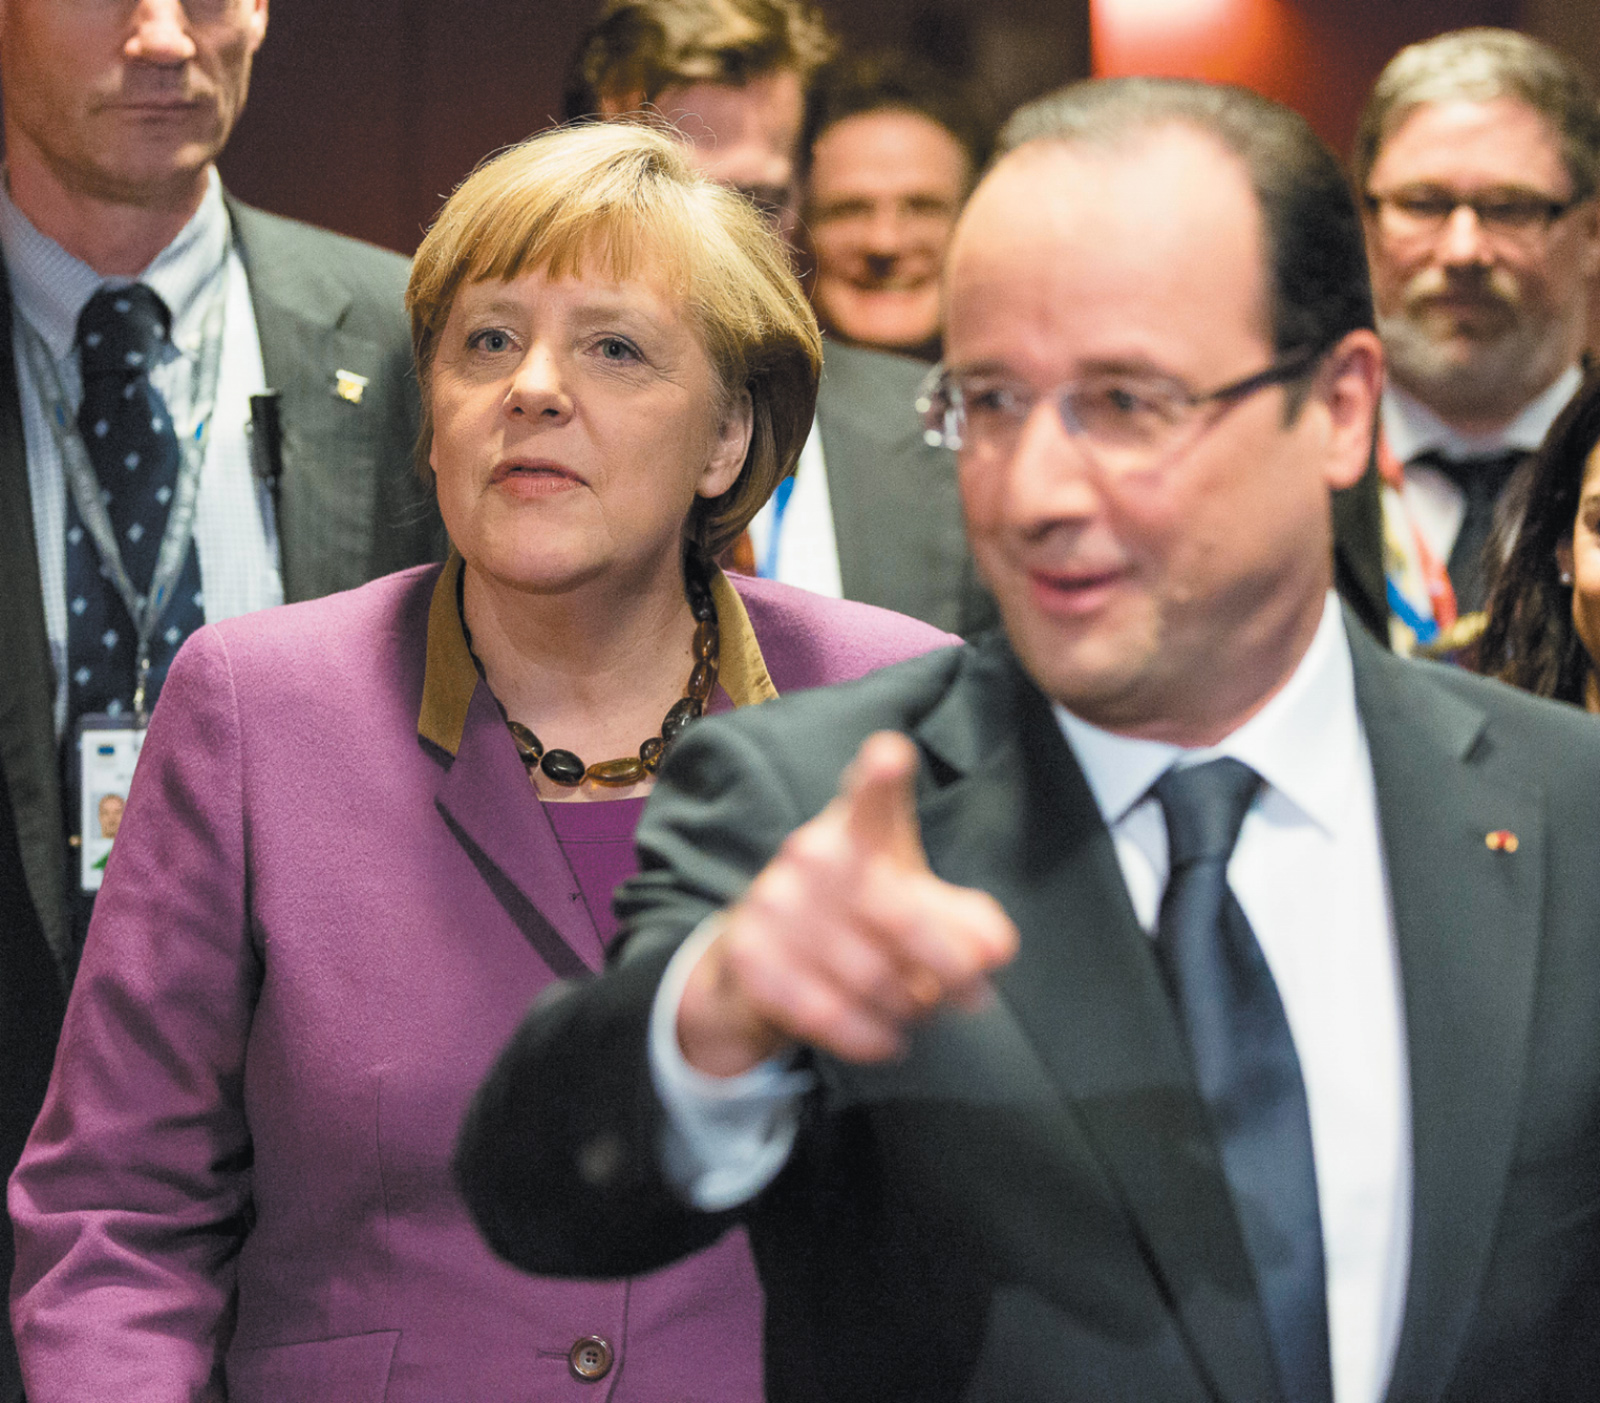 German Chancellor Angela Merkel and French President François Hollande at a summit of the European Union, Brussels, February 2013